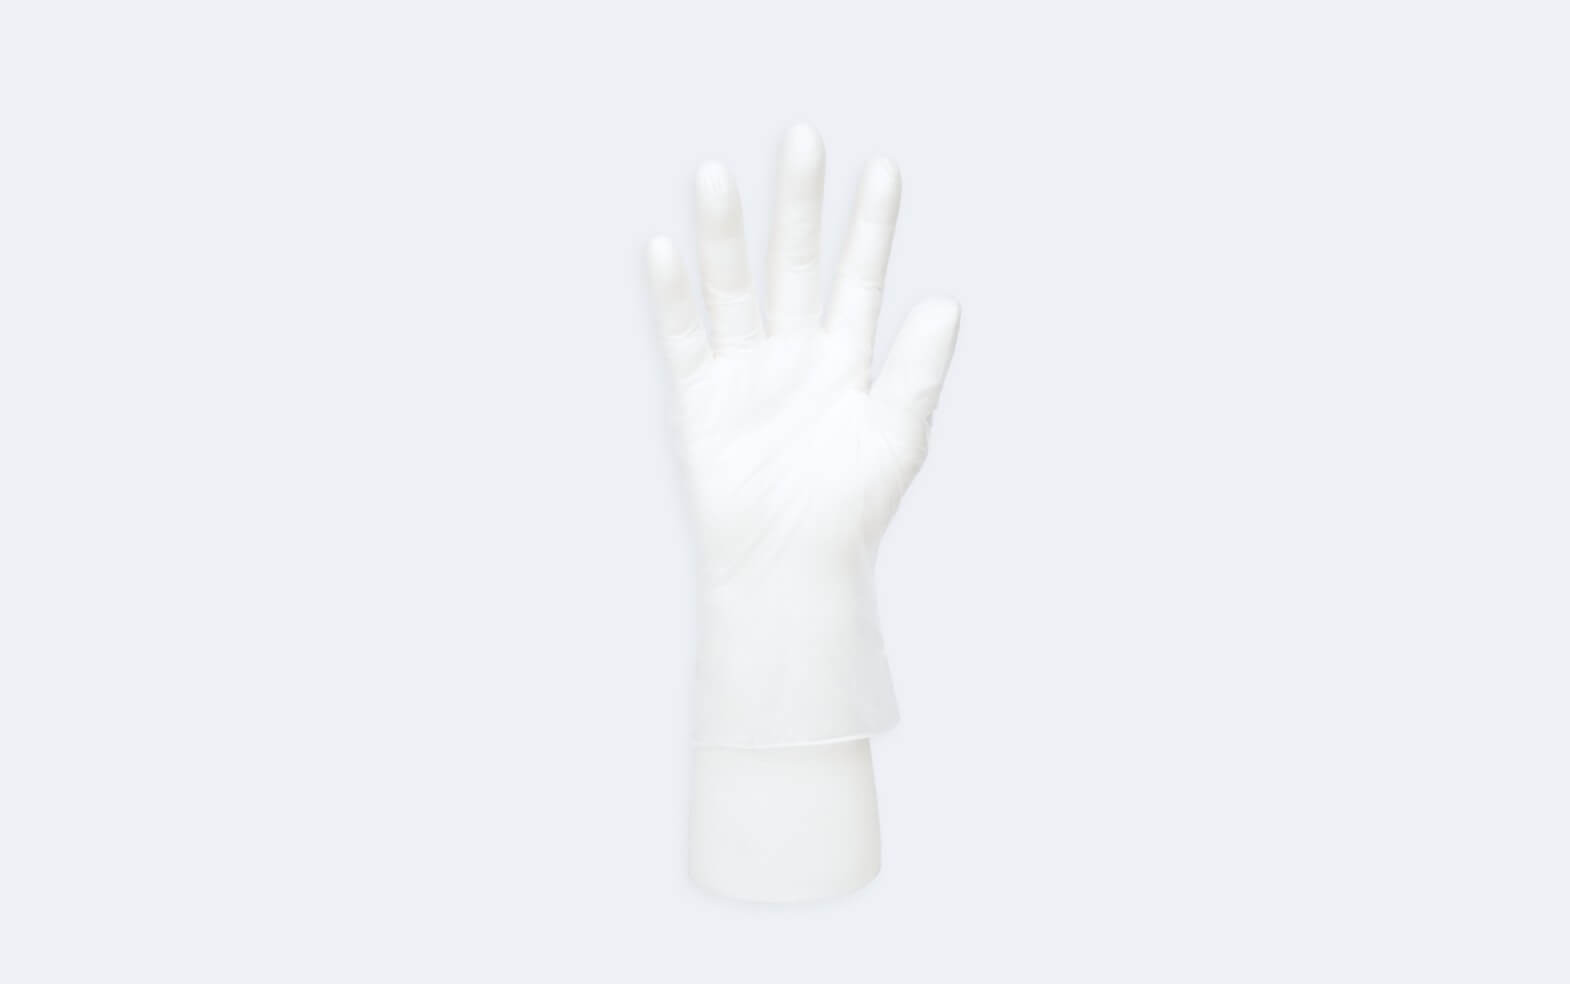 INTCO medical Vinyl gloves are made of polyvinyl chloride (PVC) material and are an economical option.